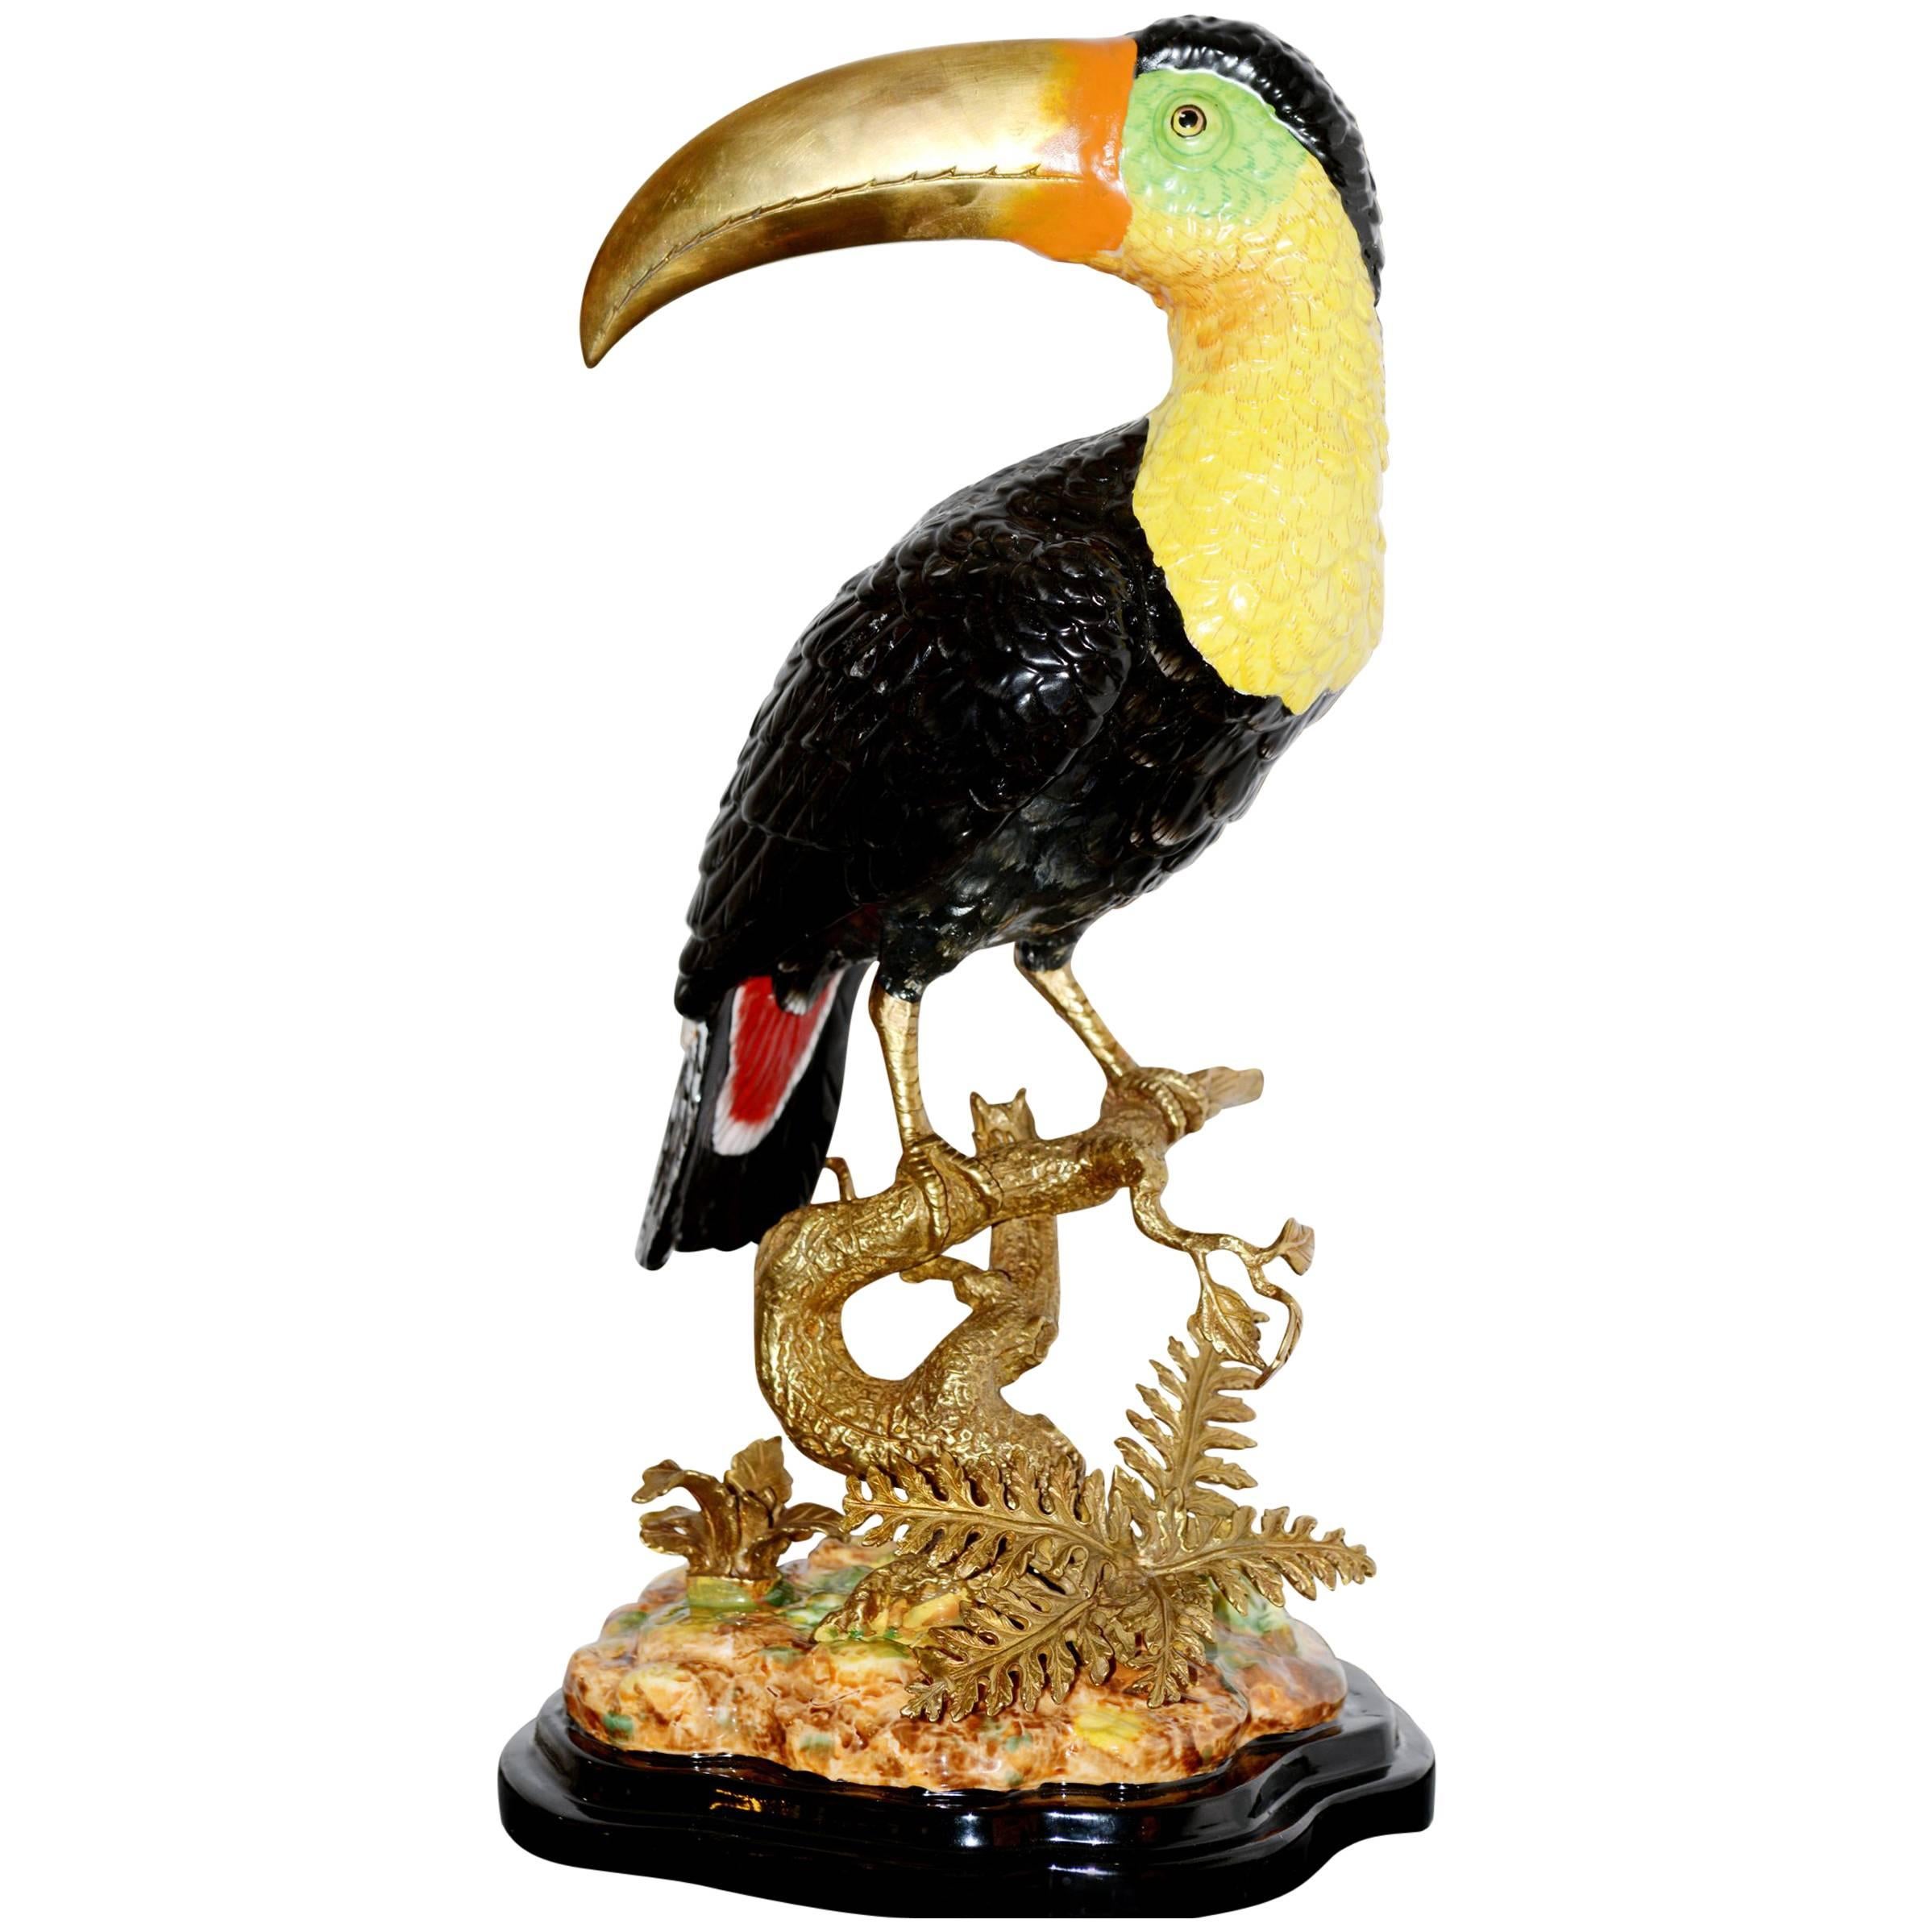 Toucan Sculpture in Solid Porcelain Hand-Painted Finish and Solid Bronze For Sale